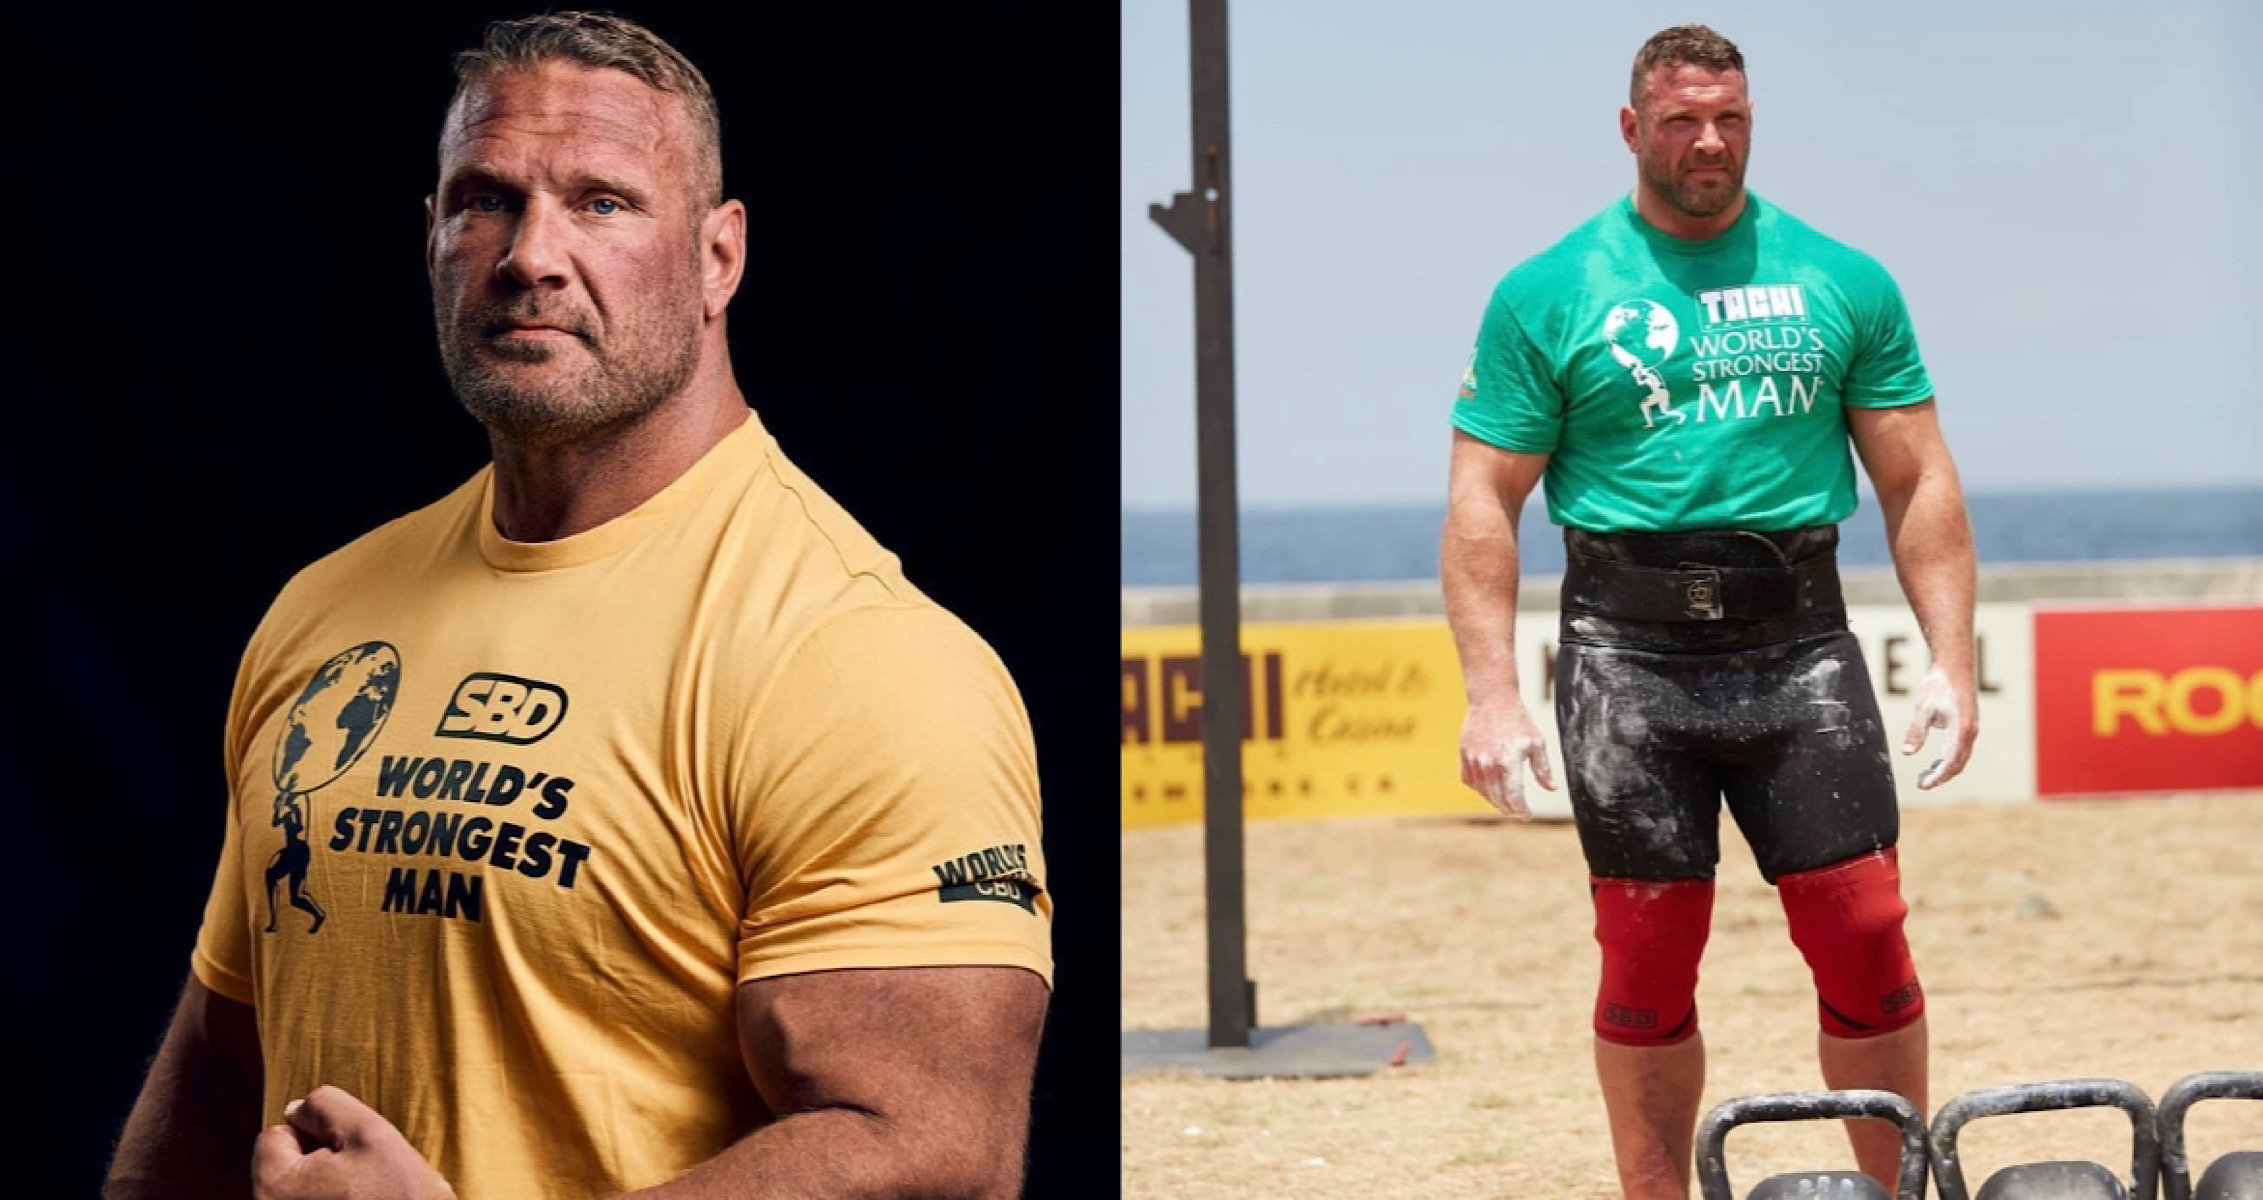 After Suffering Injury Terry Hollands Drops Out, Retires From WSM Competition